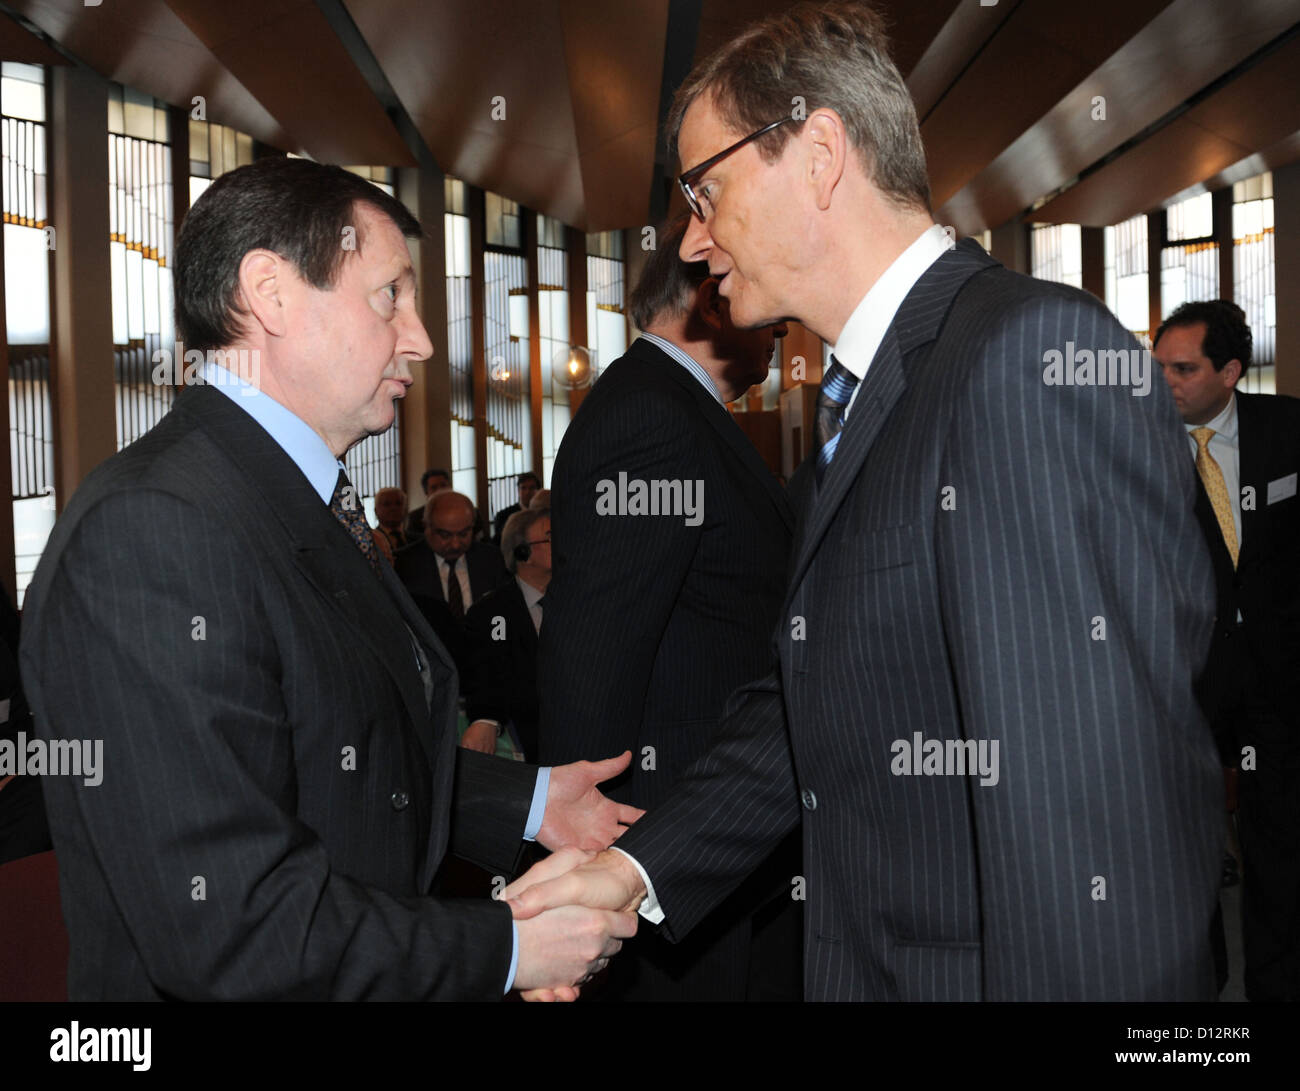 German Foreign Minister Guido Westerwelle (R) greets Vladimir Grinin, Ambassador of the Russian Federation in Germany, in Bad Krozingen, Germany, 04 December 2012. Westerwelle gave a speech on the German-Russian relationship. Photo: Patrick Seeger Stock Photo